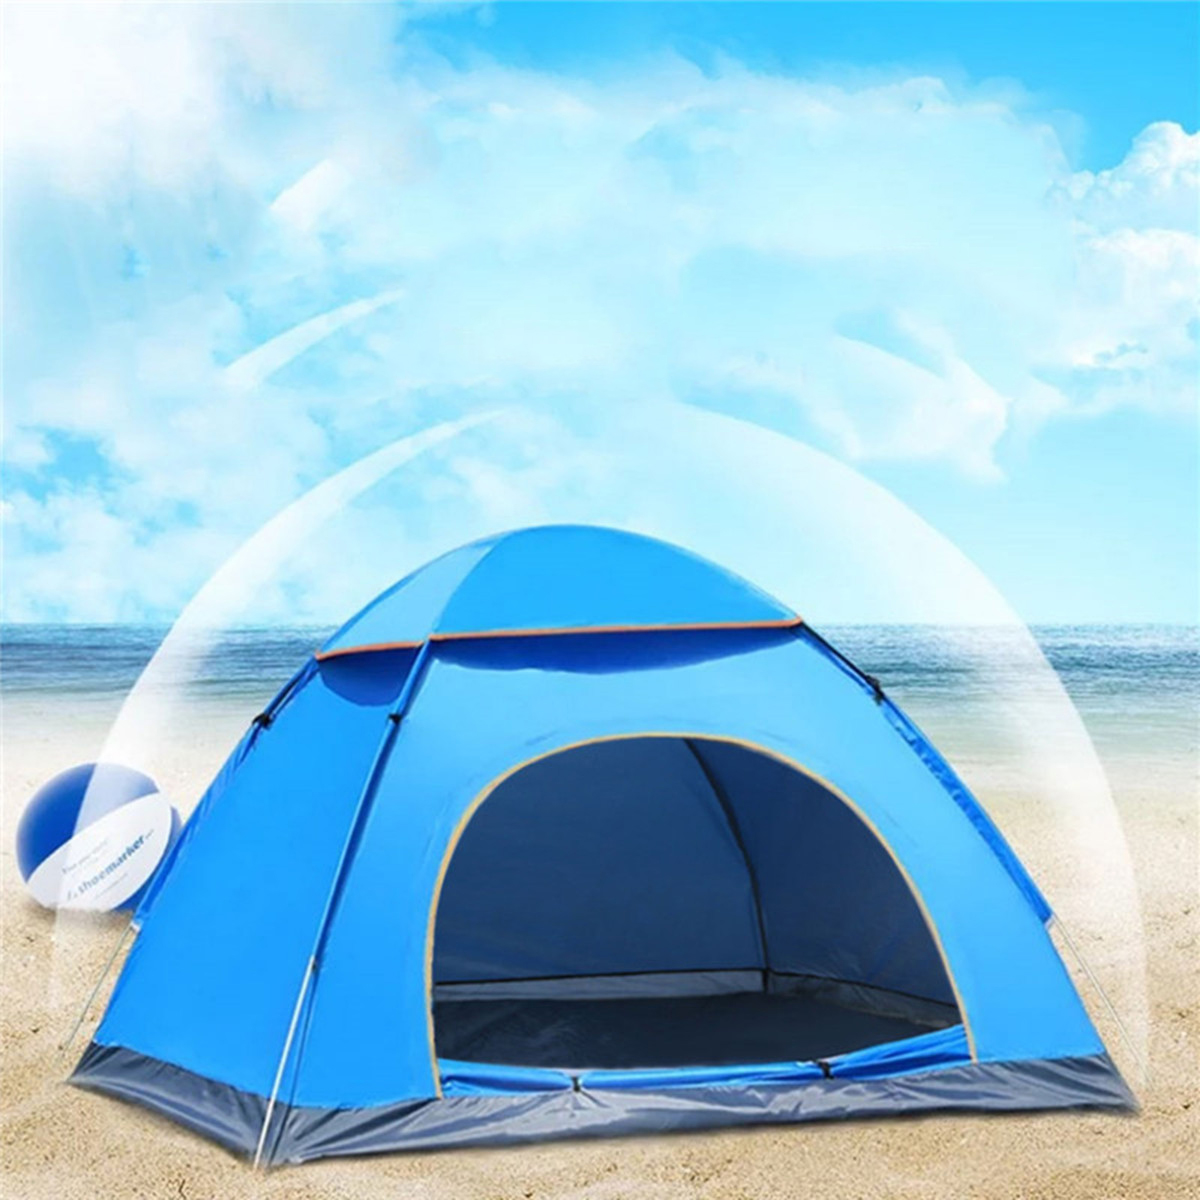 NEW Waterproof Hiking Gear Automatic Pop Up Camping Tent 3-4 Person Layer VP